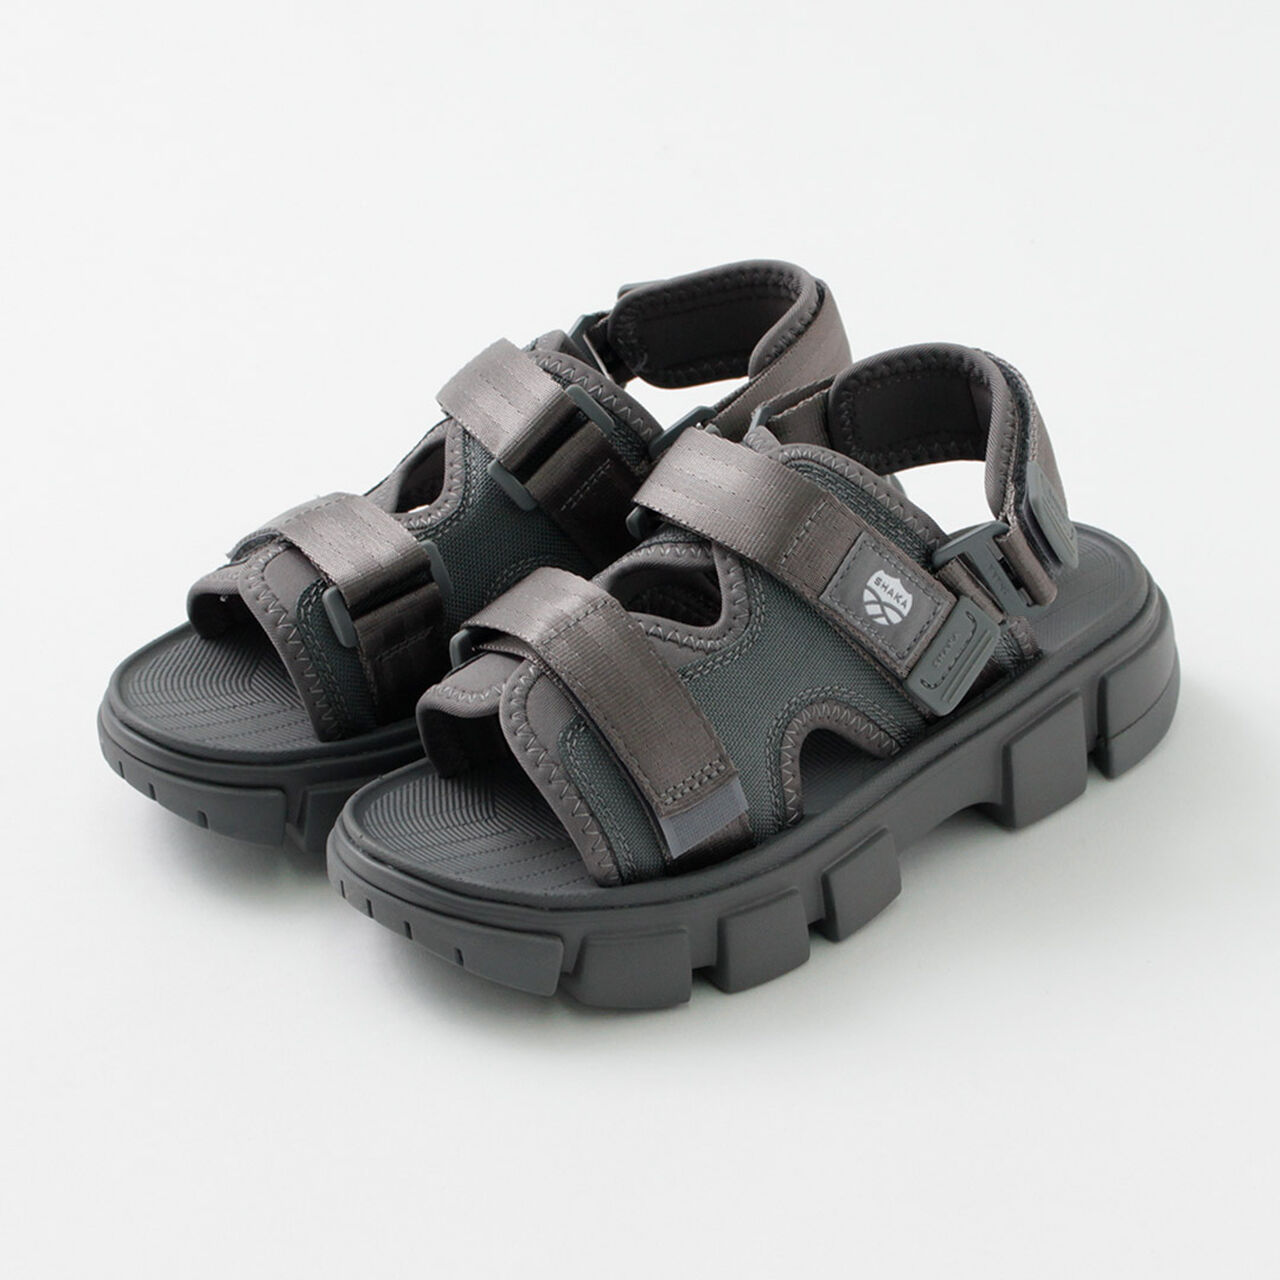 Chill Out SF Sandals,Gunmetal, large image number 0